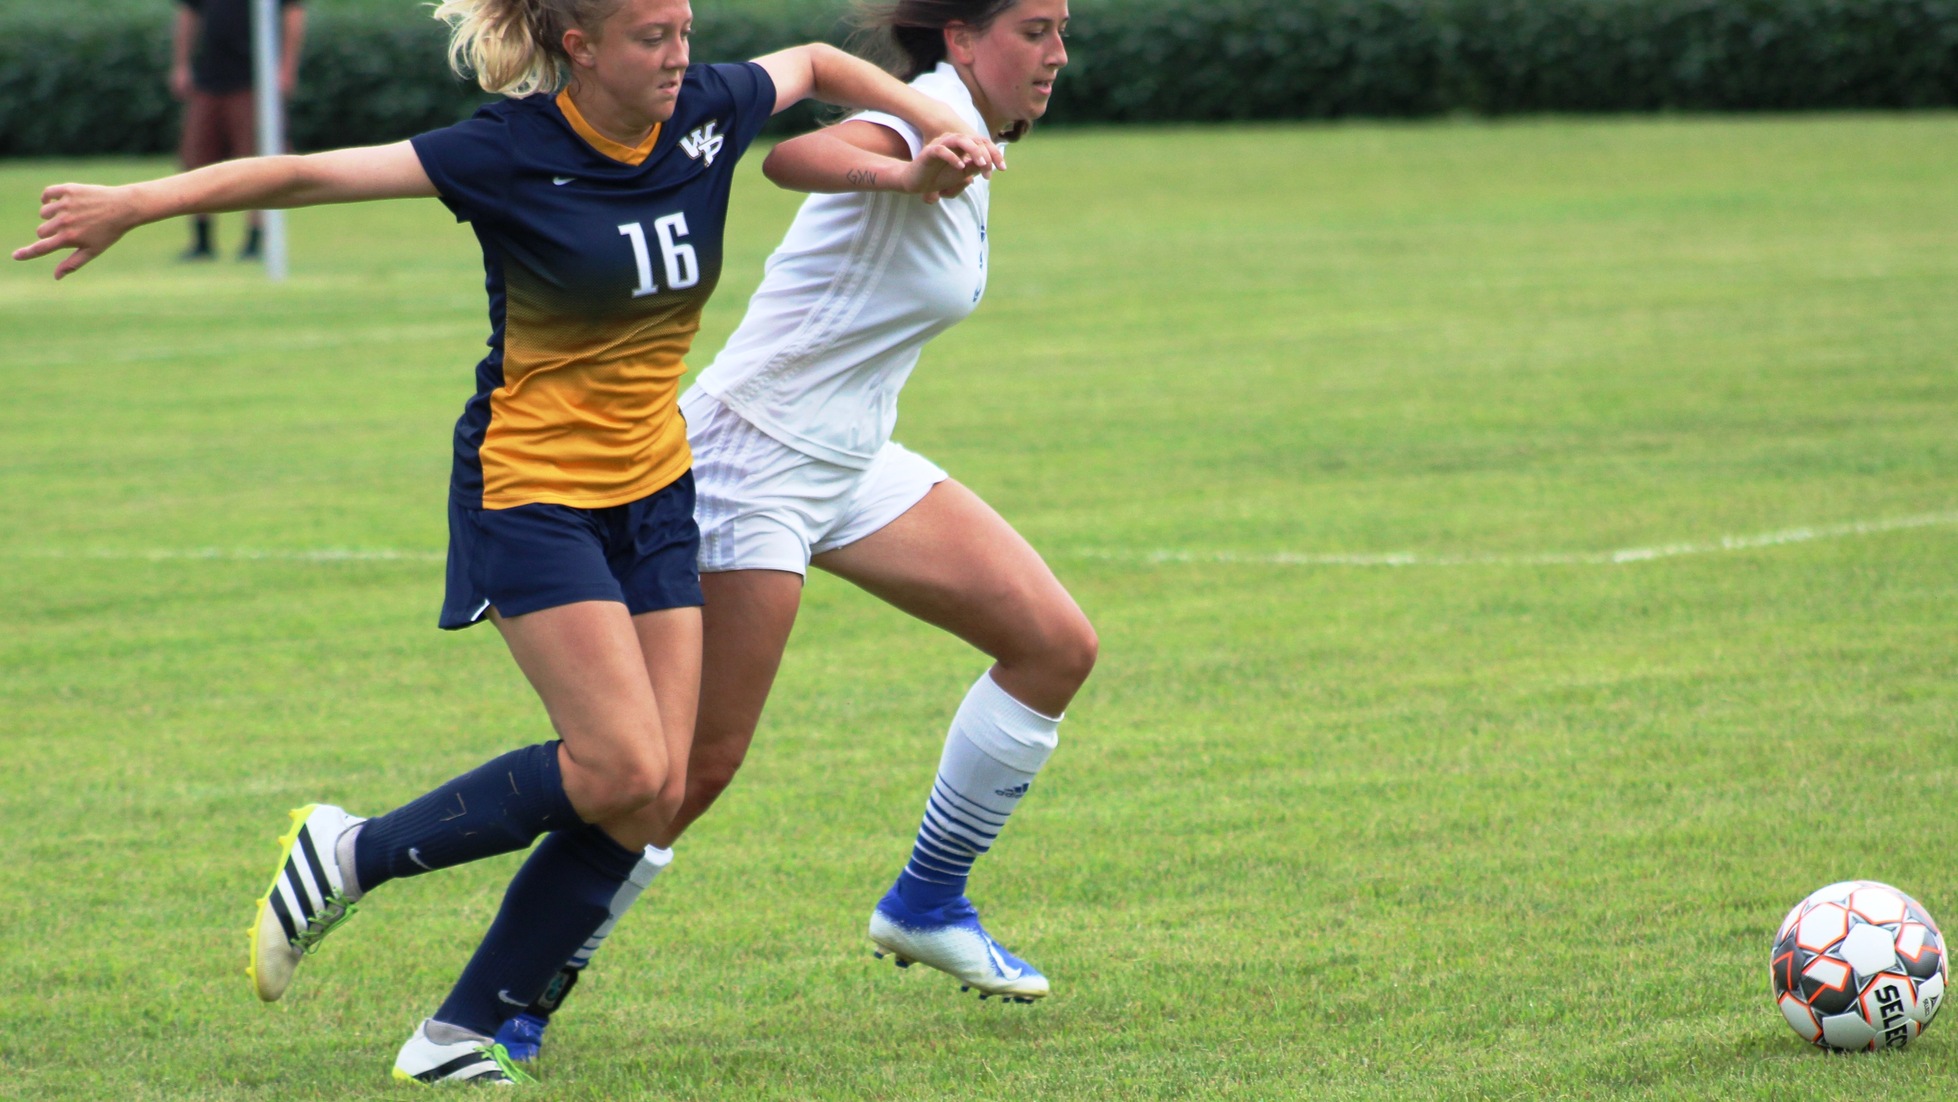 NIACC's Lily Walker battles for the ball during a preseason scrimmage.